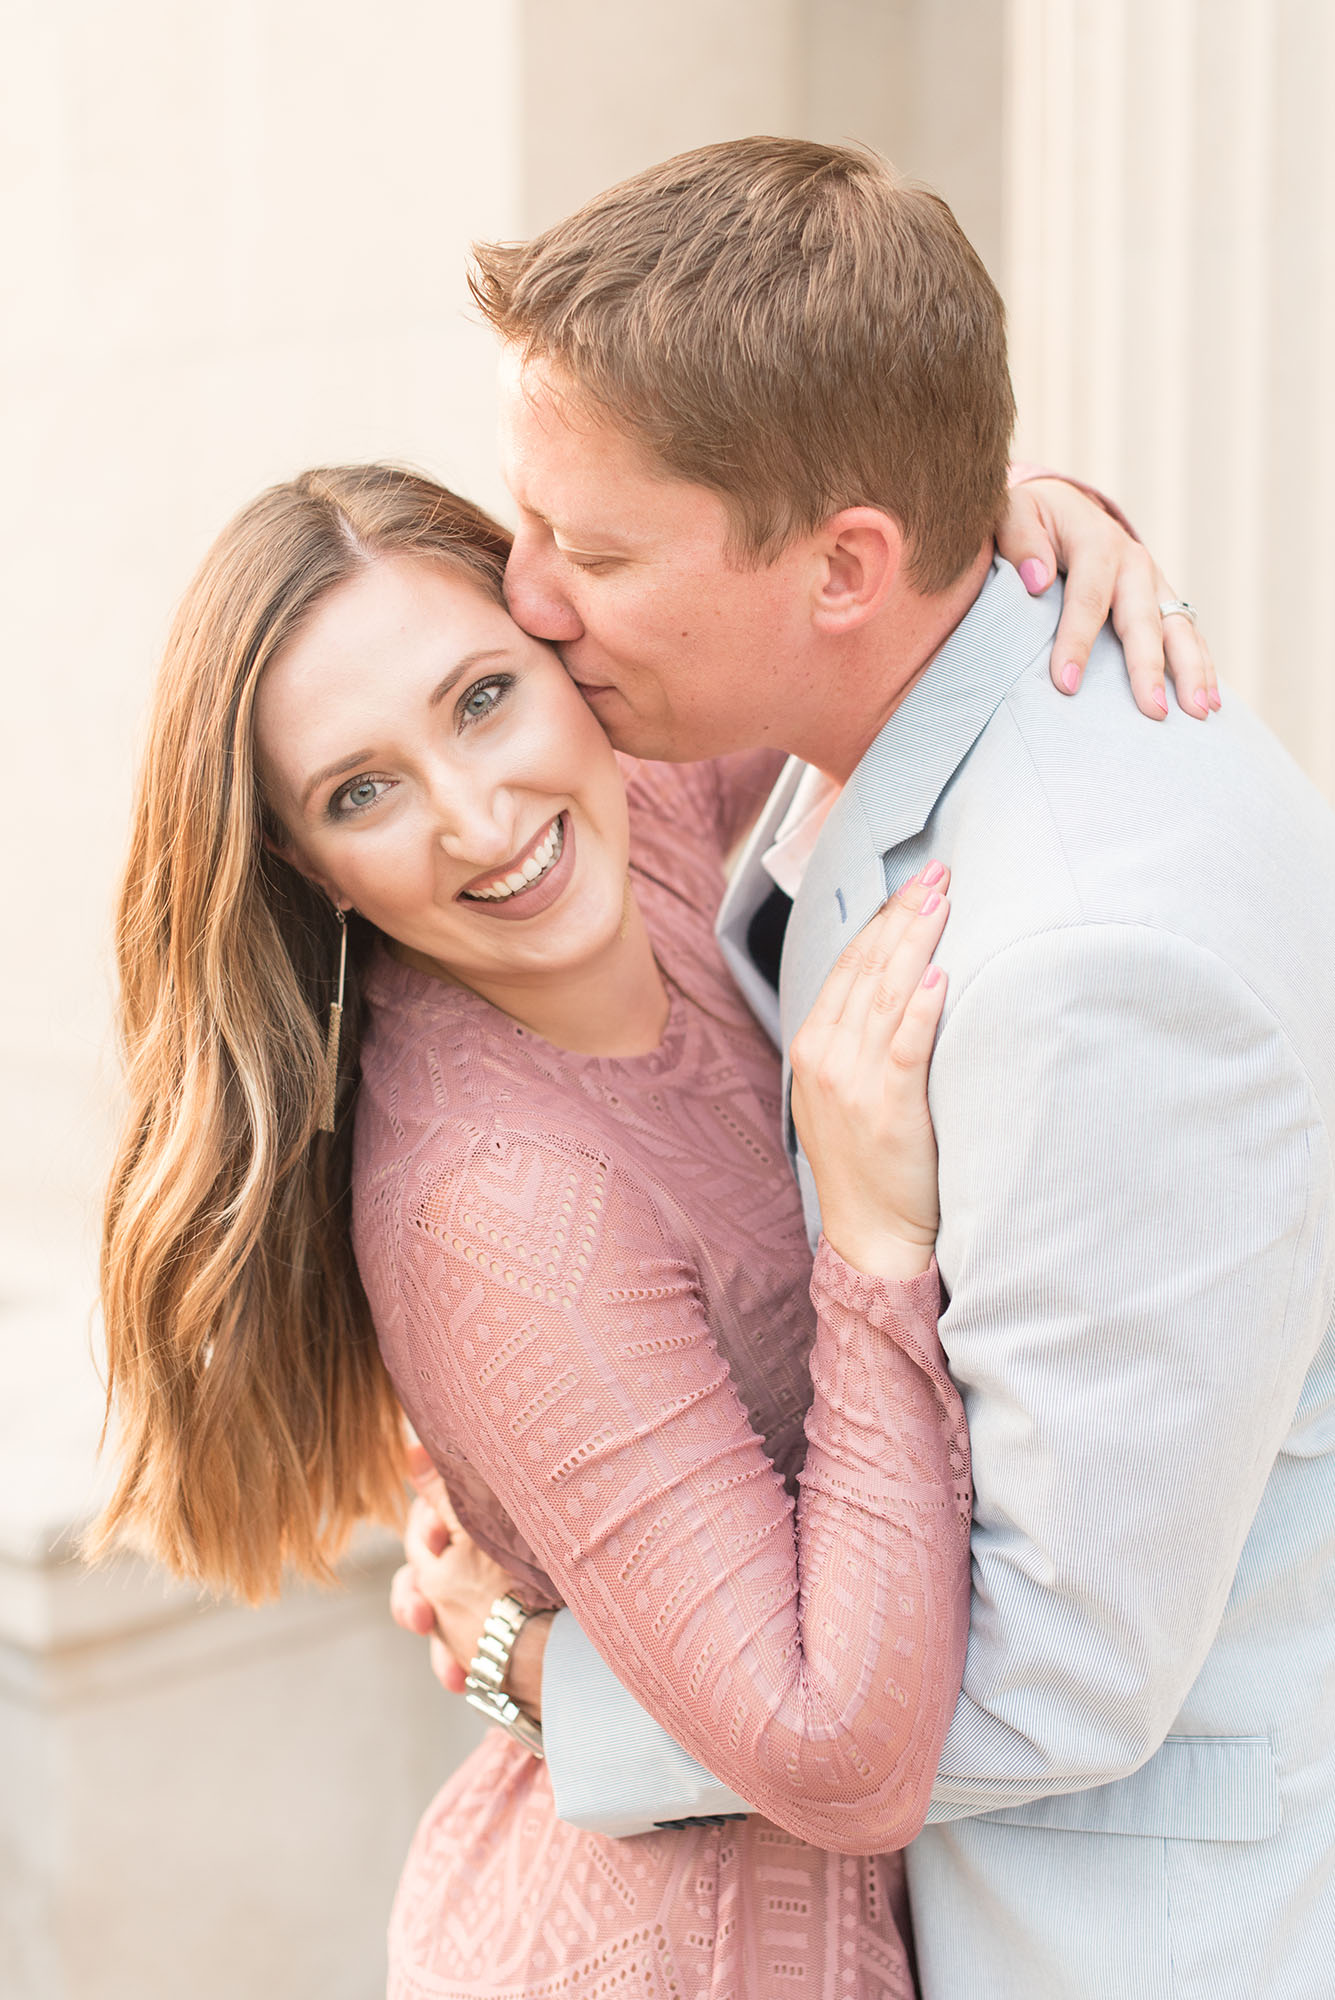 Man kisses his fiancee during engagement photos by Indianapolis wedding photographer Victoria Rayburn Photography